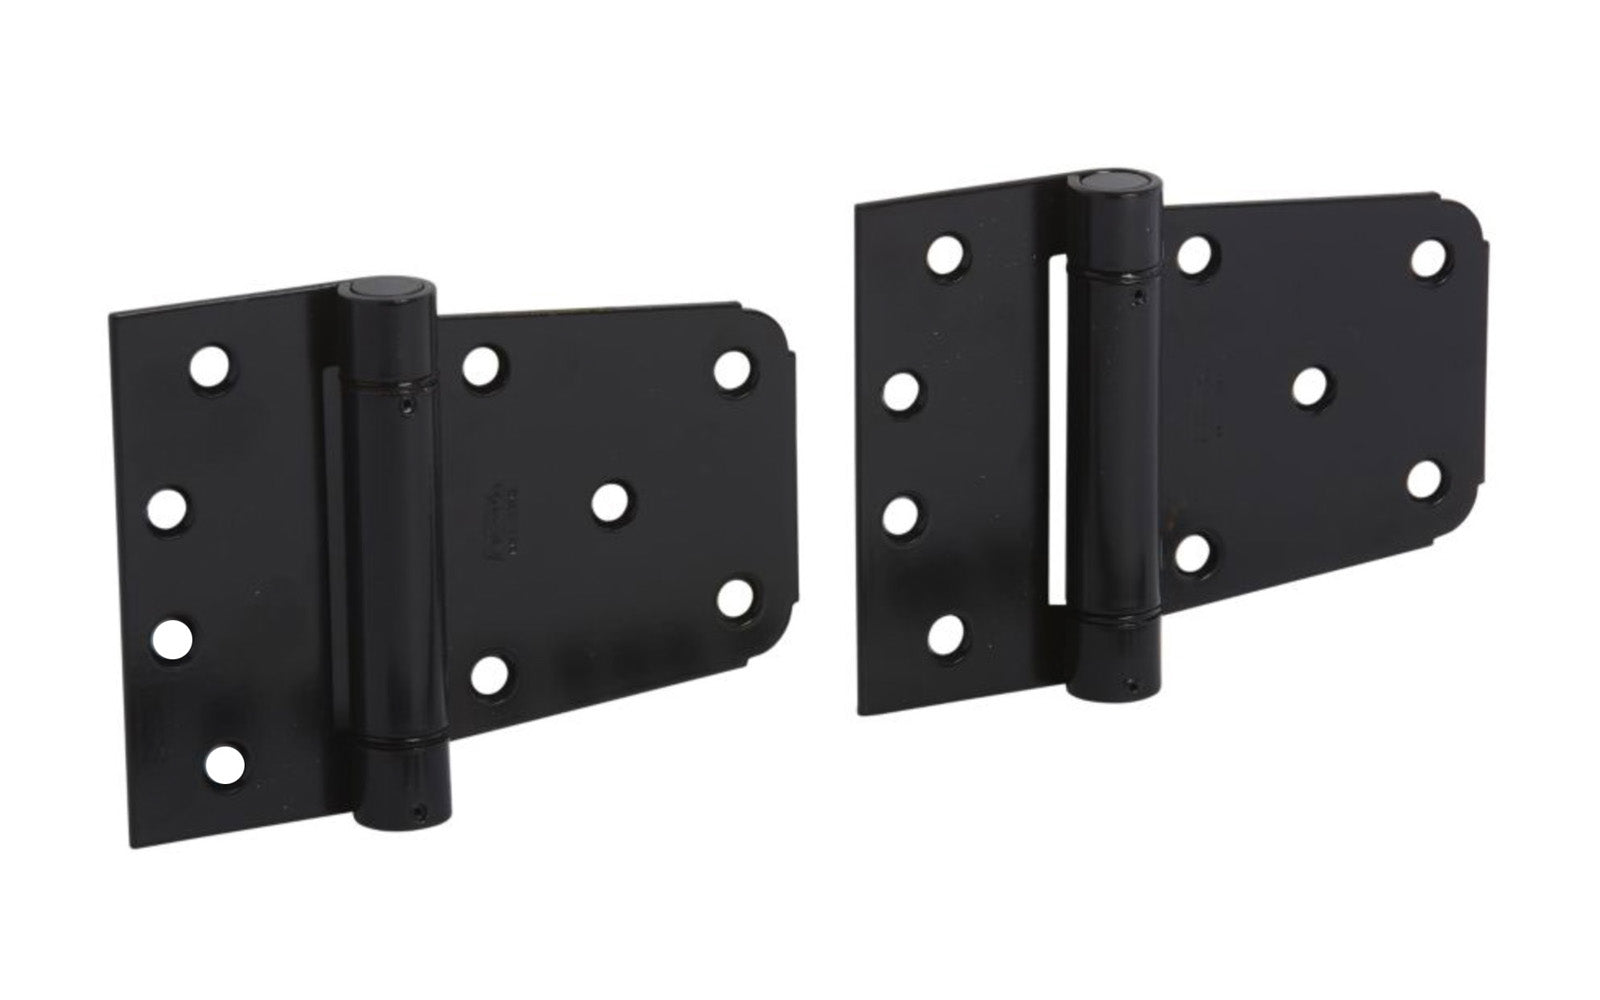 3-1/2" Auto-Close HD Black Finish Gate Hinges are auto-close gate hinges designed for variety of outdoor applications, including wood, steel, or vinyl. Automatically closes gates up to 50 lbs. Bearing design eliminates metal-to-metal contact for smooth, quiet operation. National Hardware Catalog Model N342-592